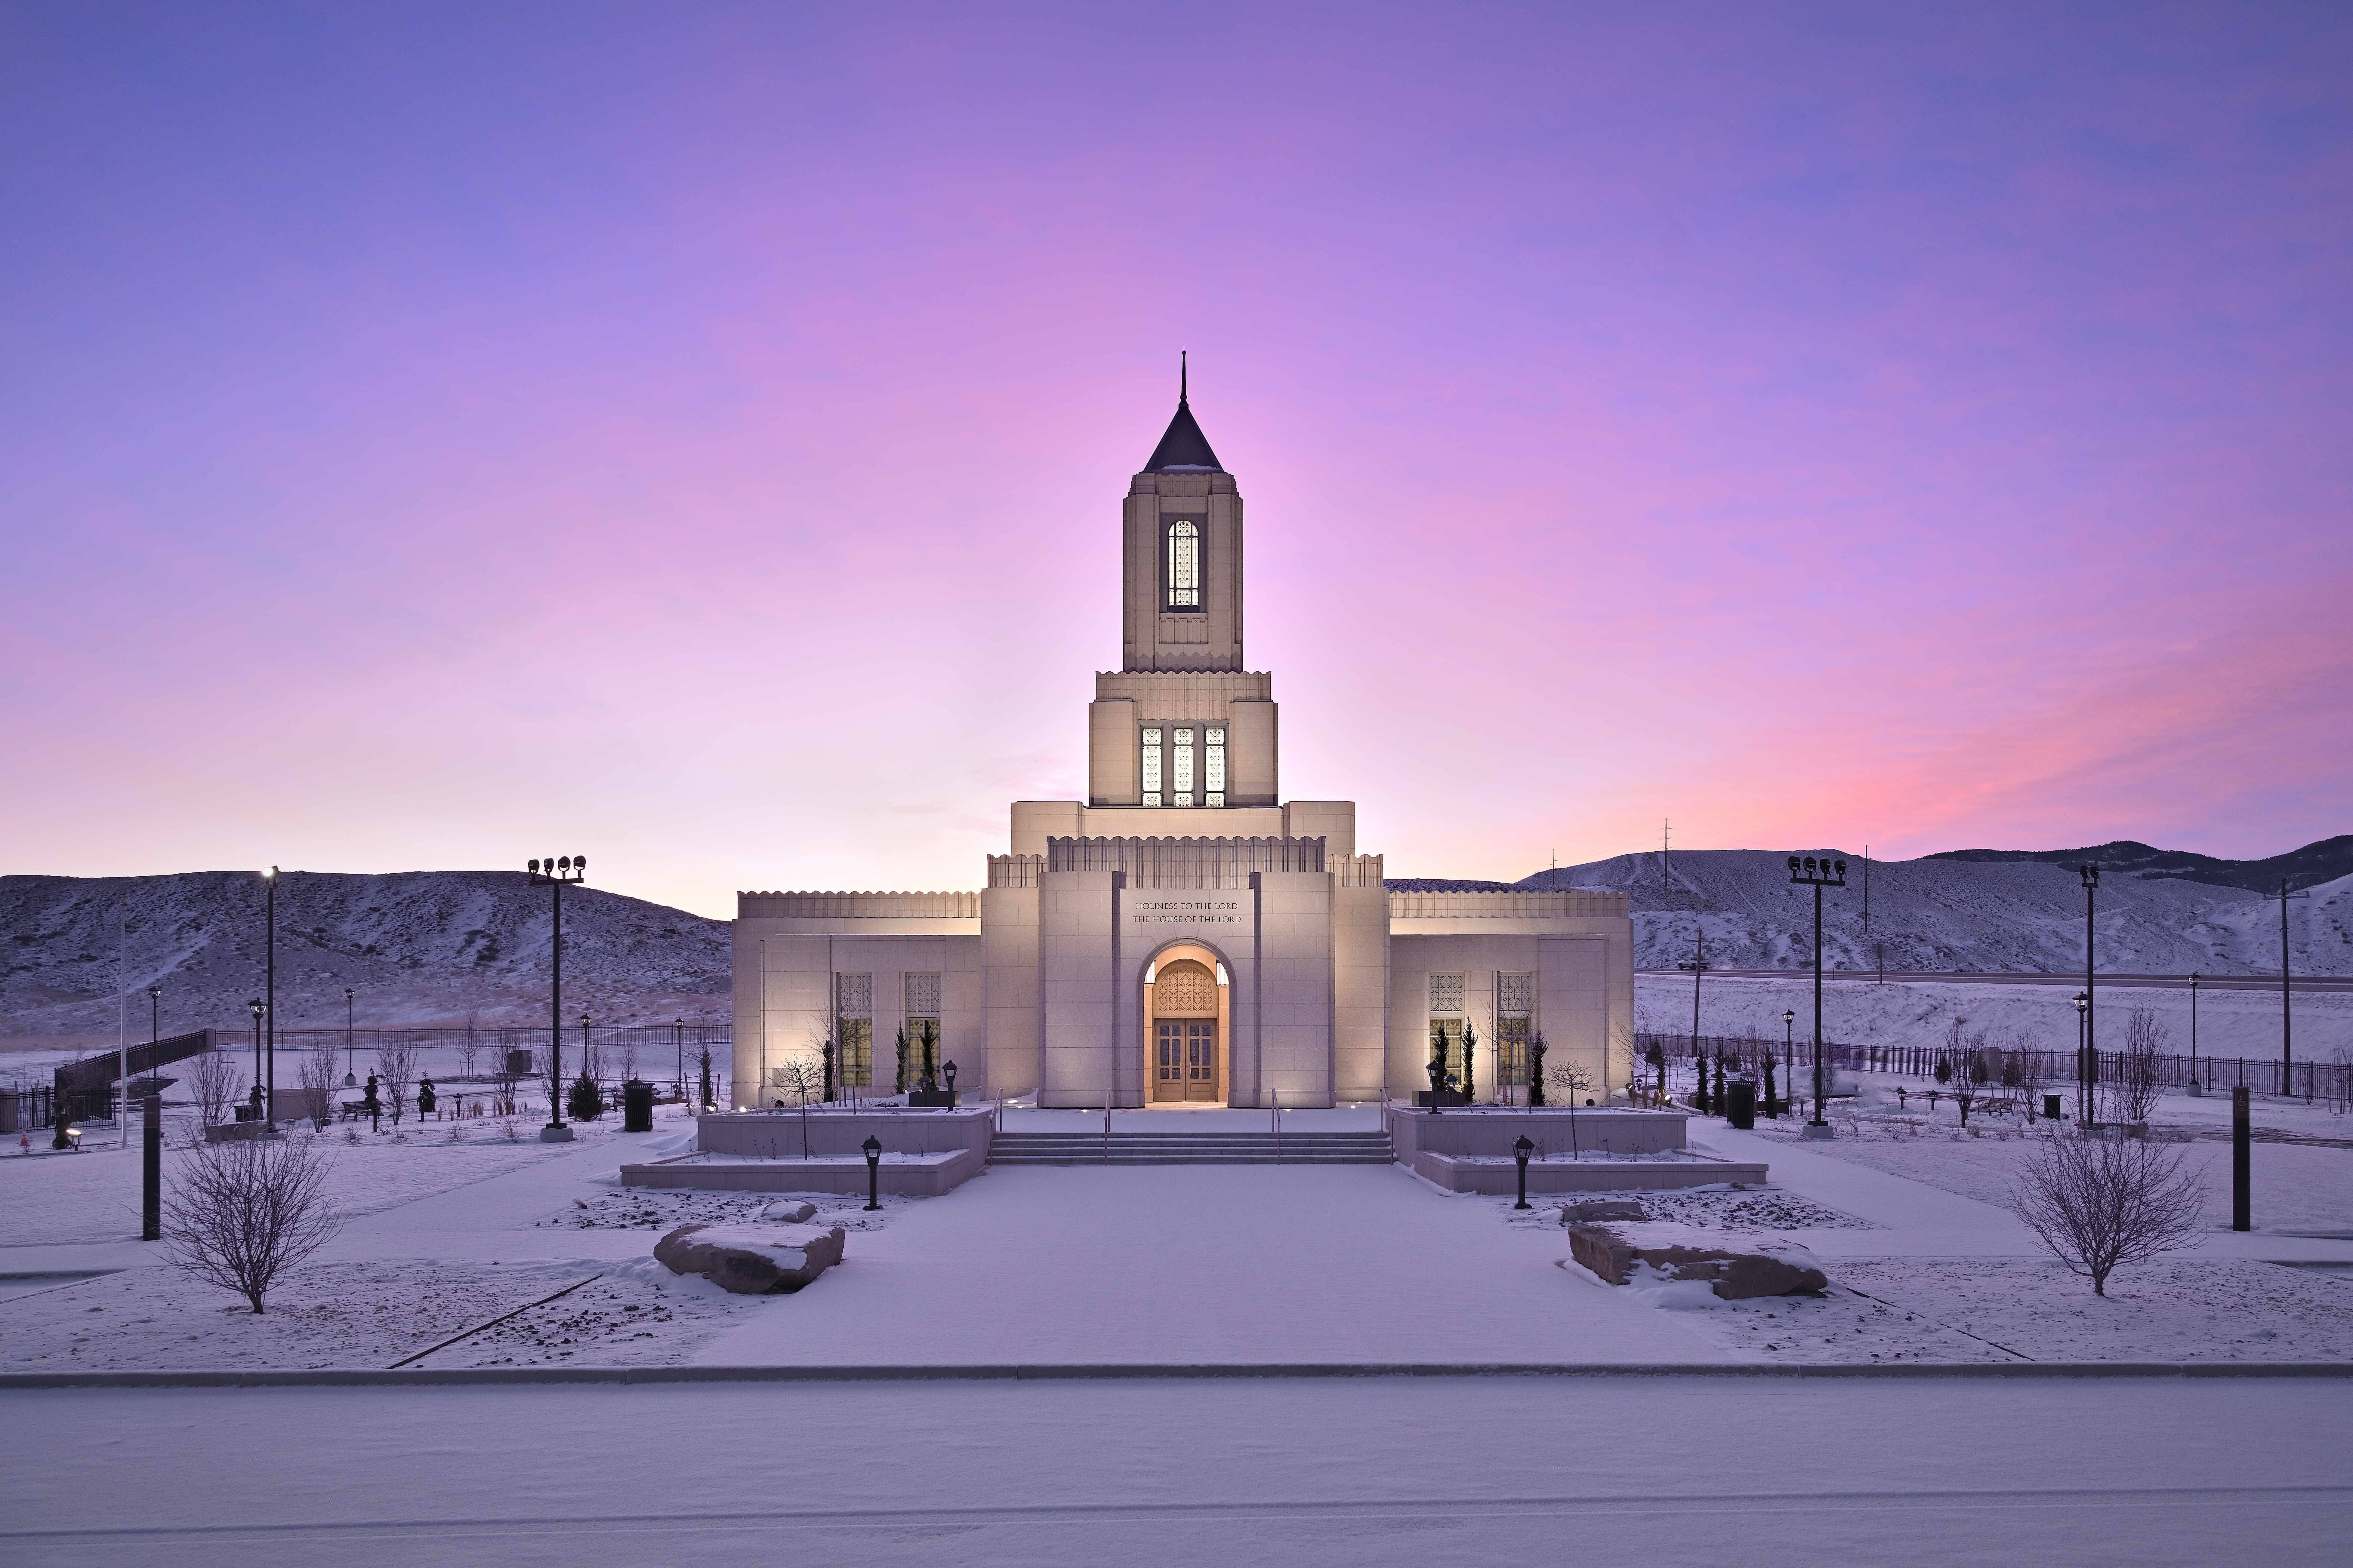 The exterior of the Casper Wyoming Temple amid snowy ground.